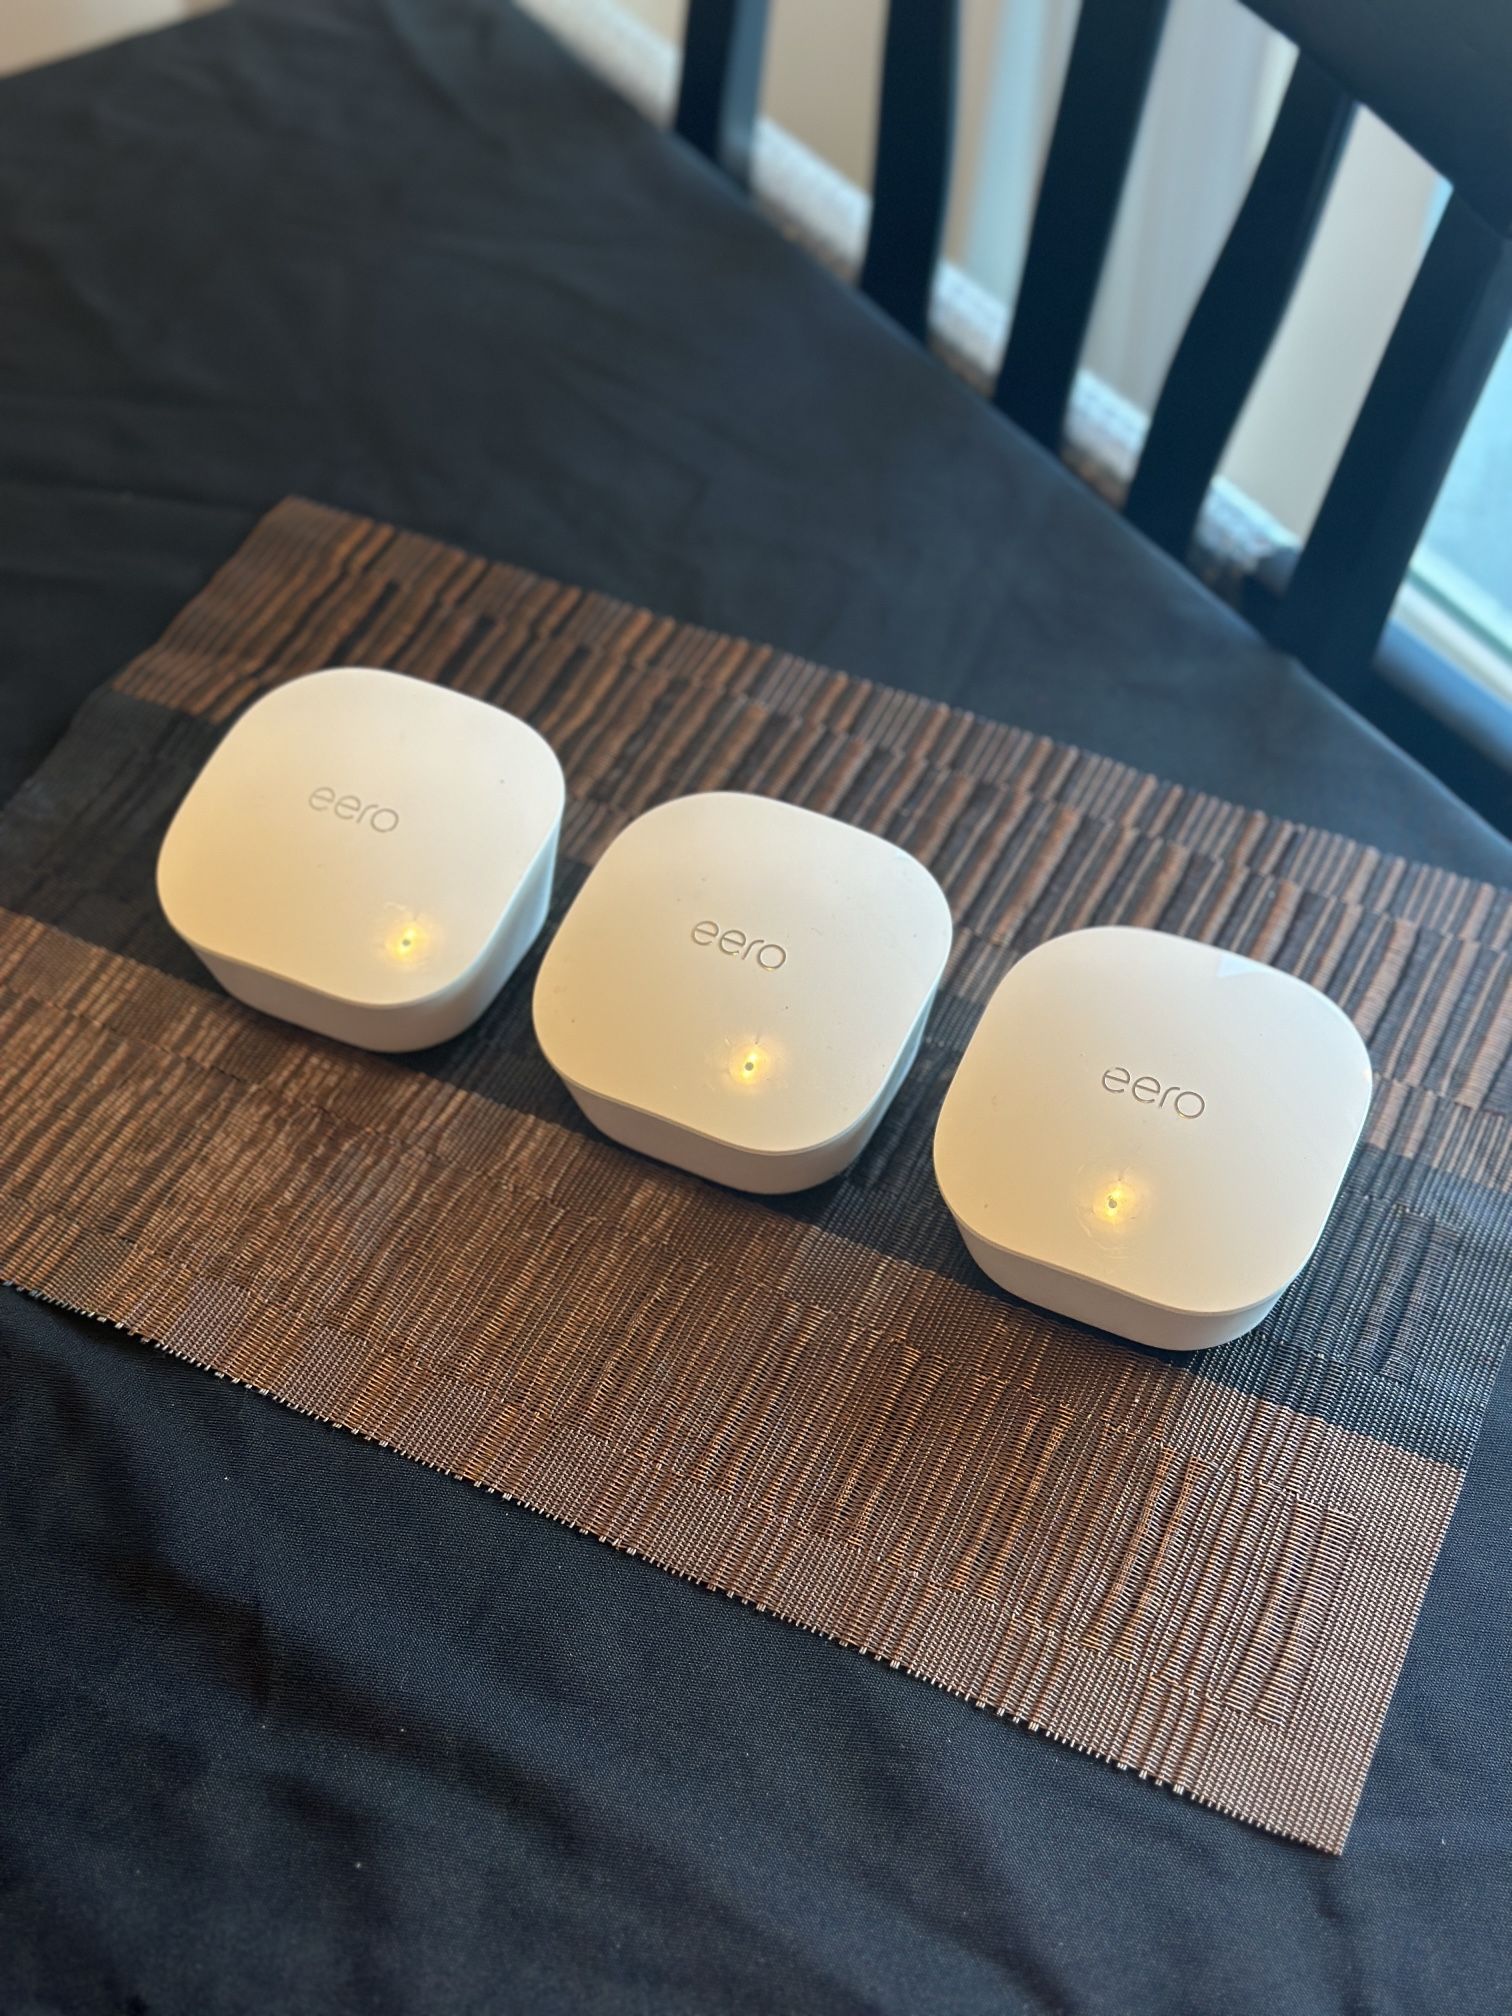 Eero 6+ Mesh WiFi Router for sale! 🔥